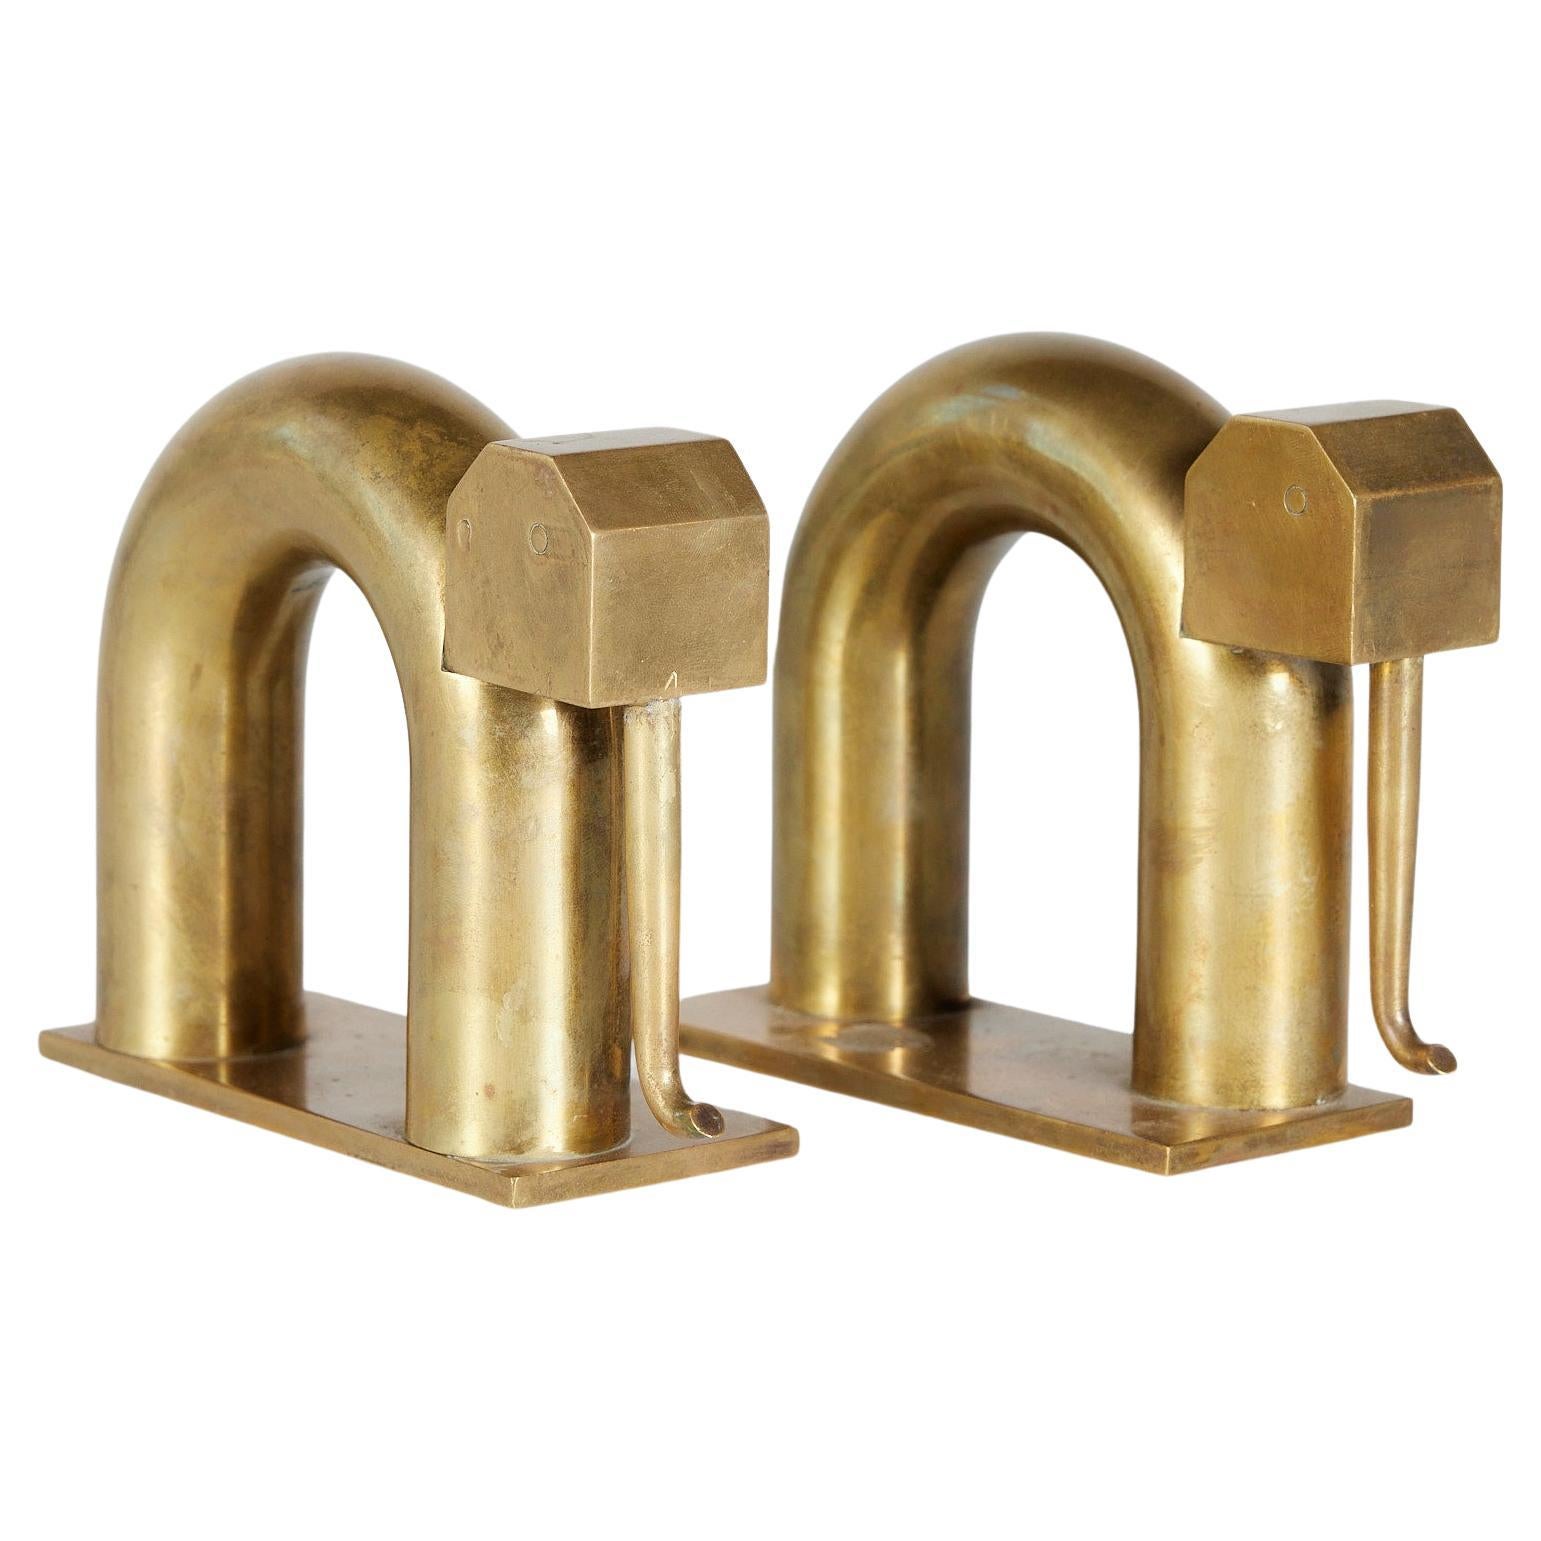 Pair of Brass Elephant Bookends by Walter Von Nessen for Chase USA